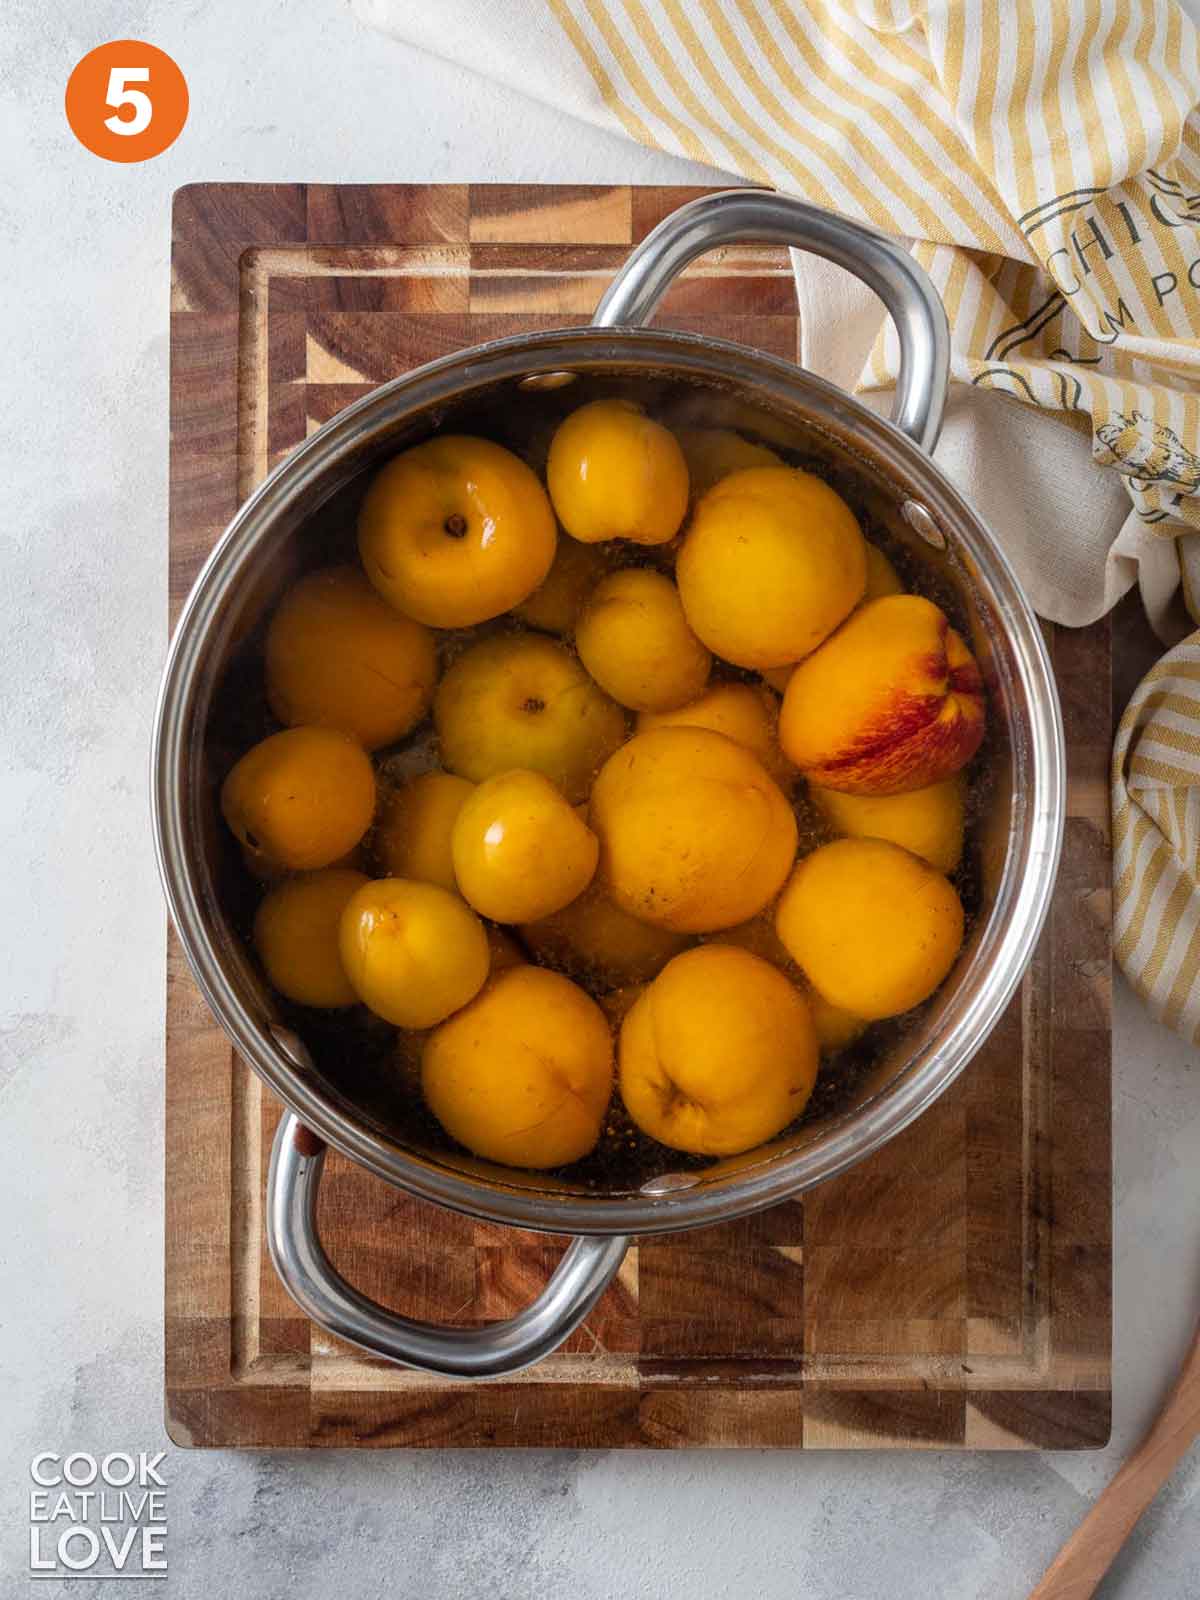 Peaches in a pot of hot water.